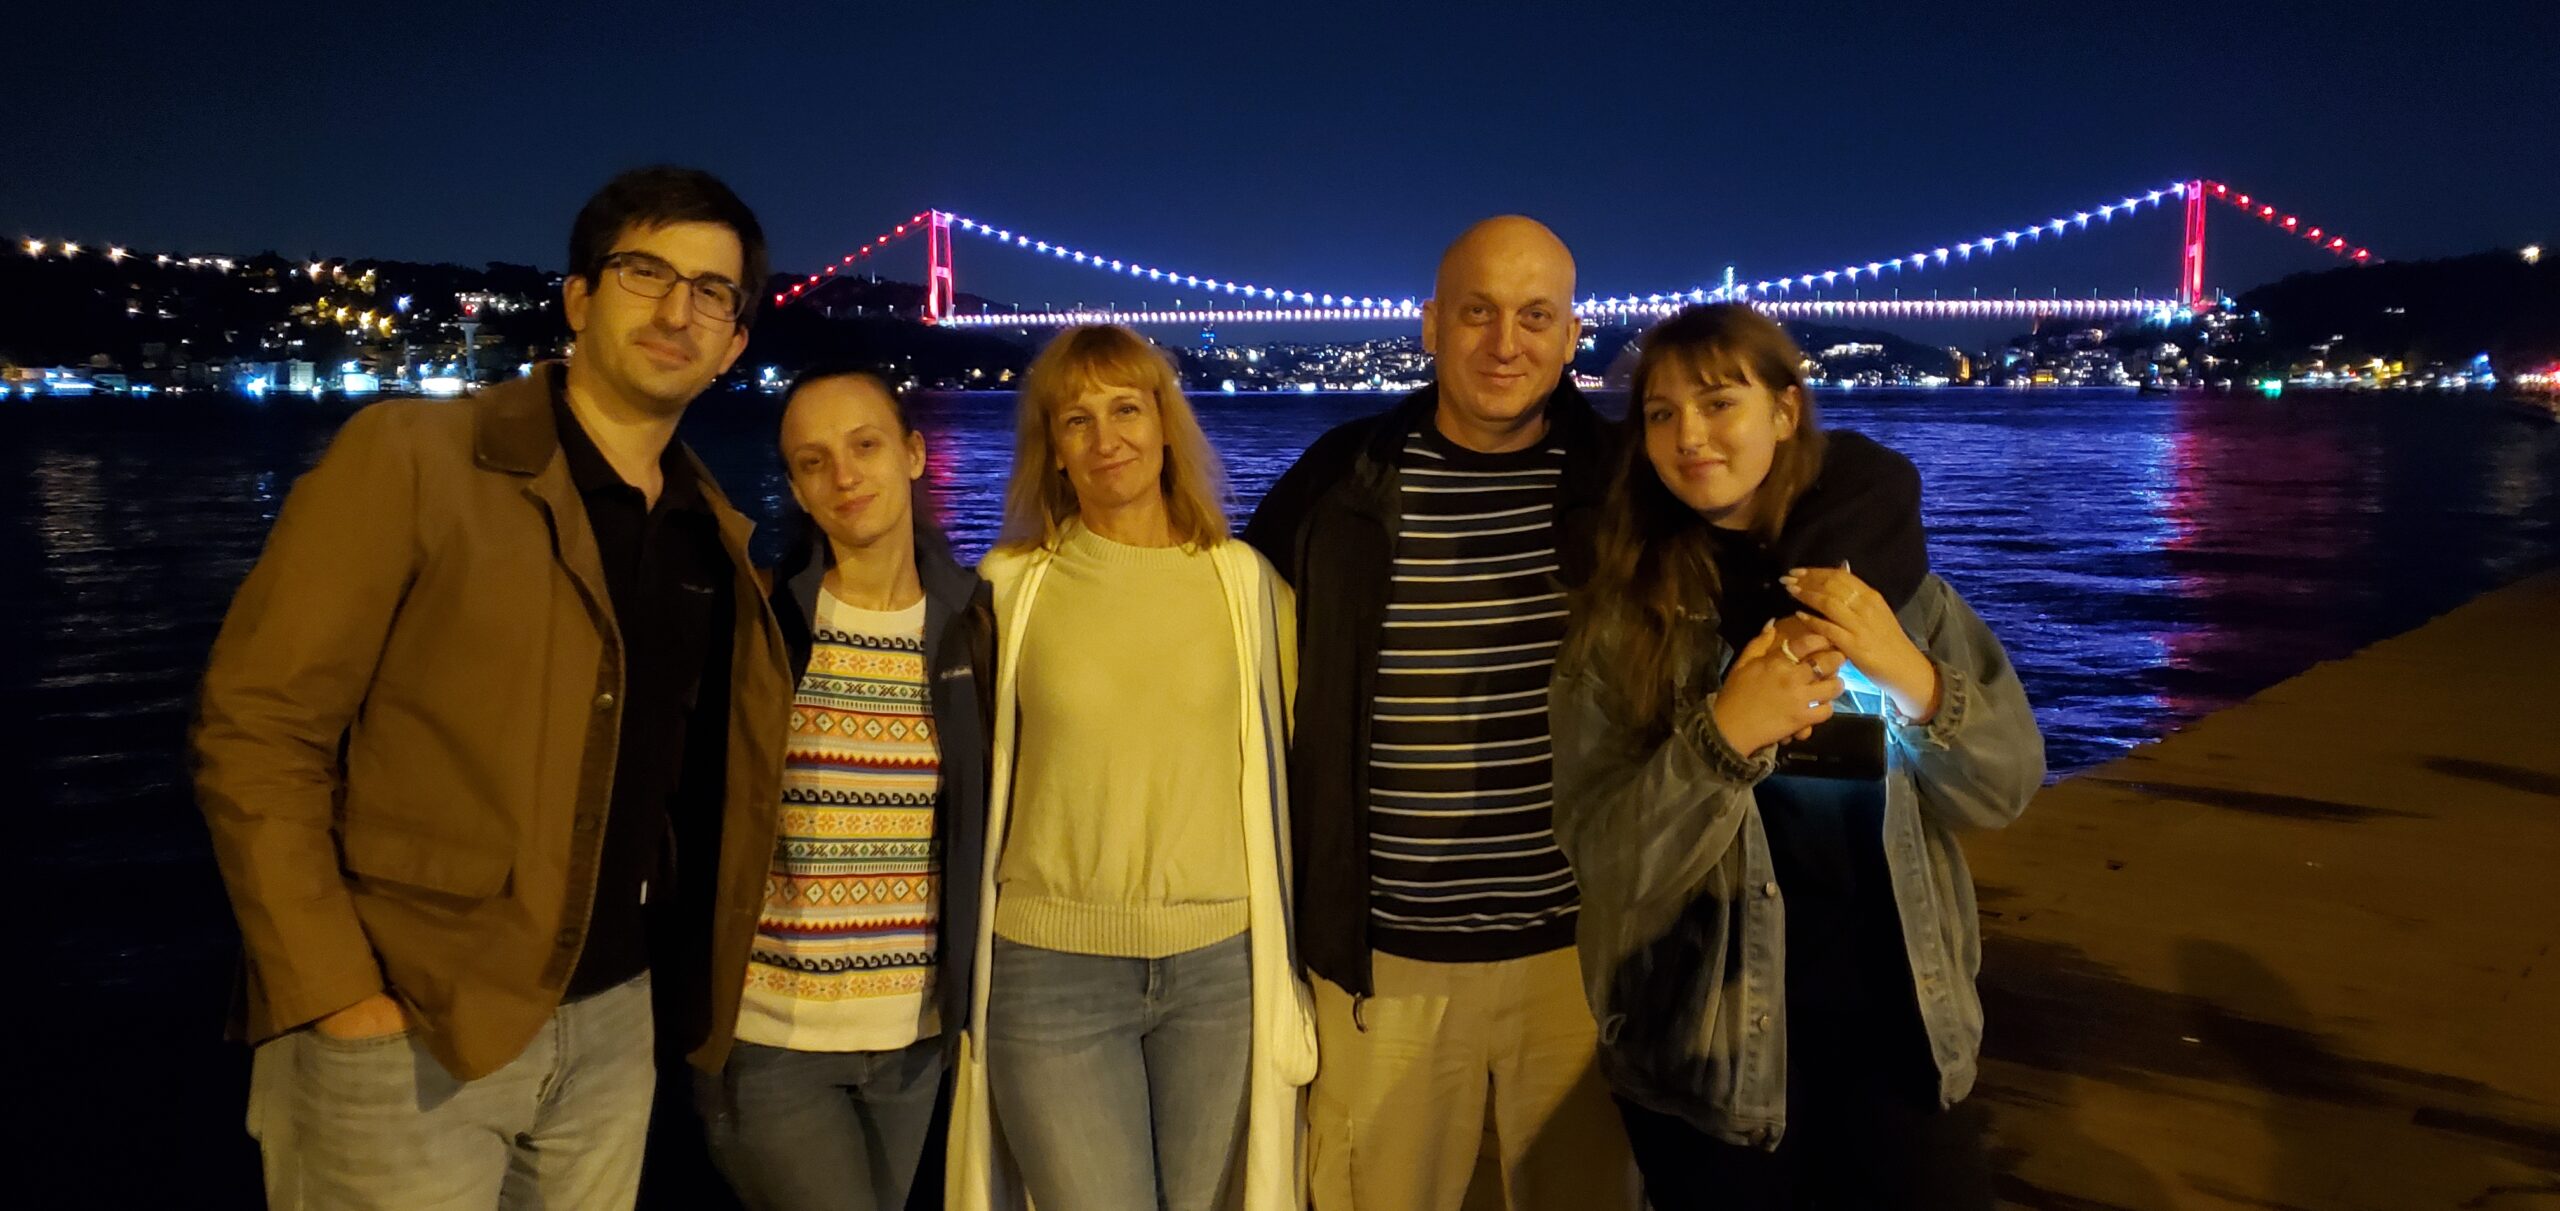 The family poses in Istanbul, Turkey (Emre Senay’s hometown) in happier times during a visit in September 2021.